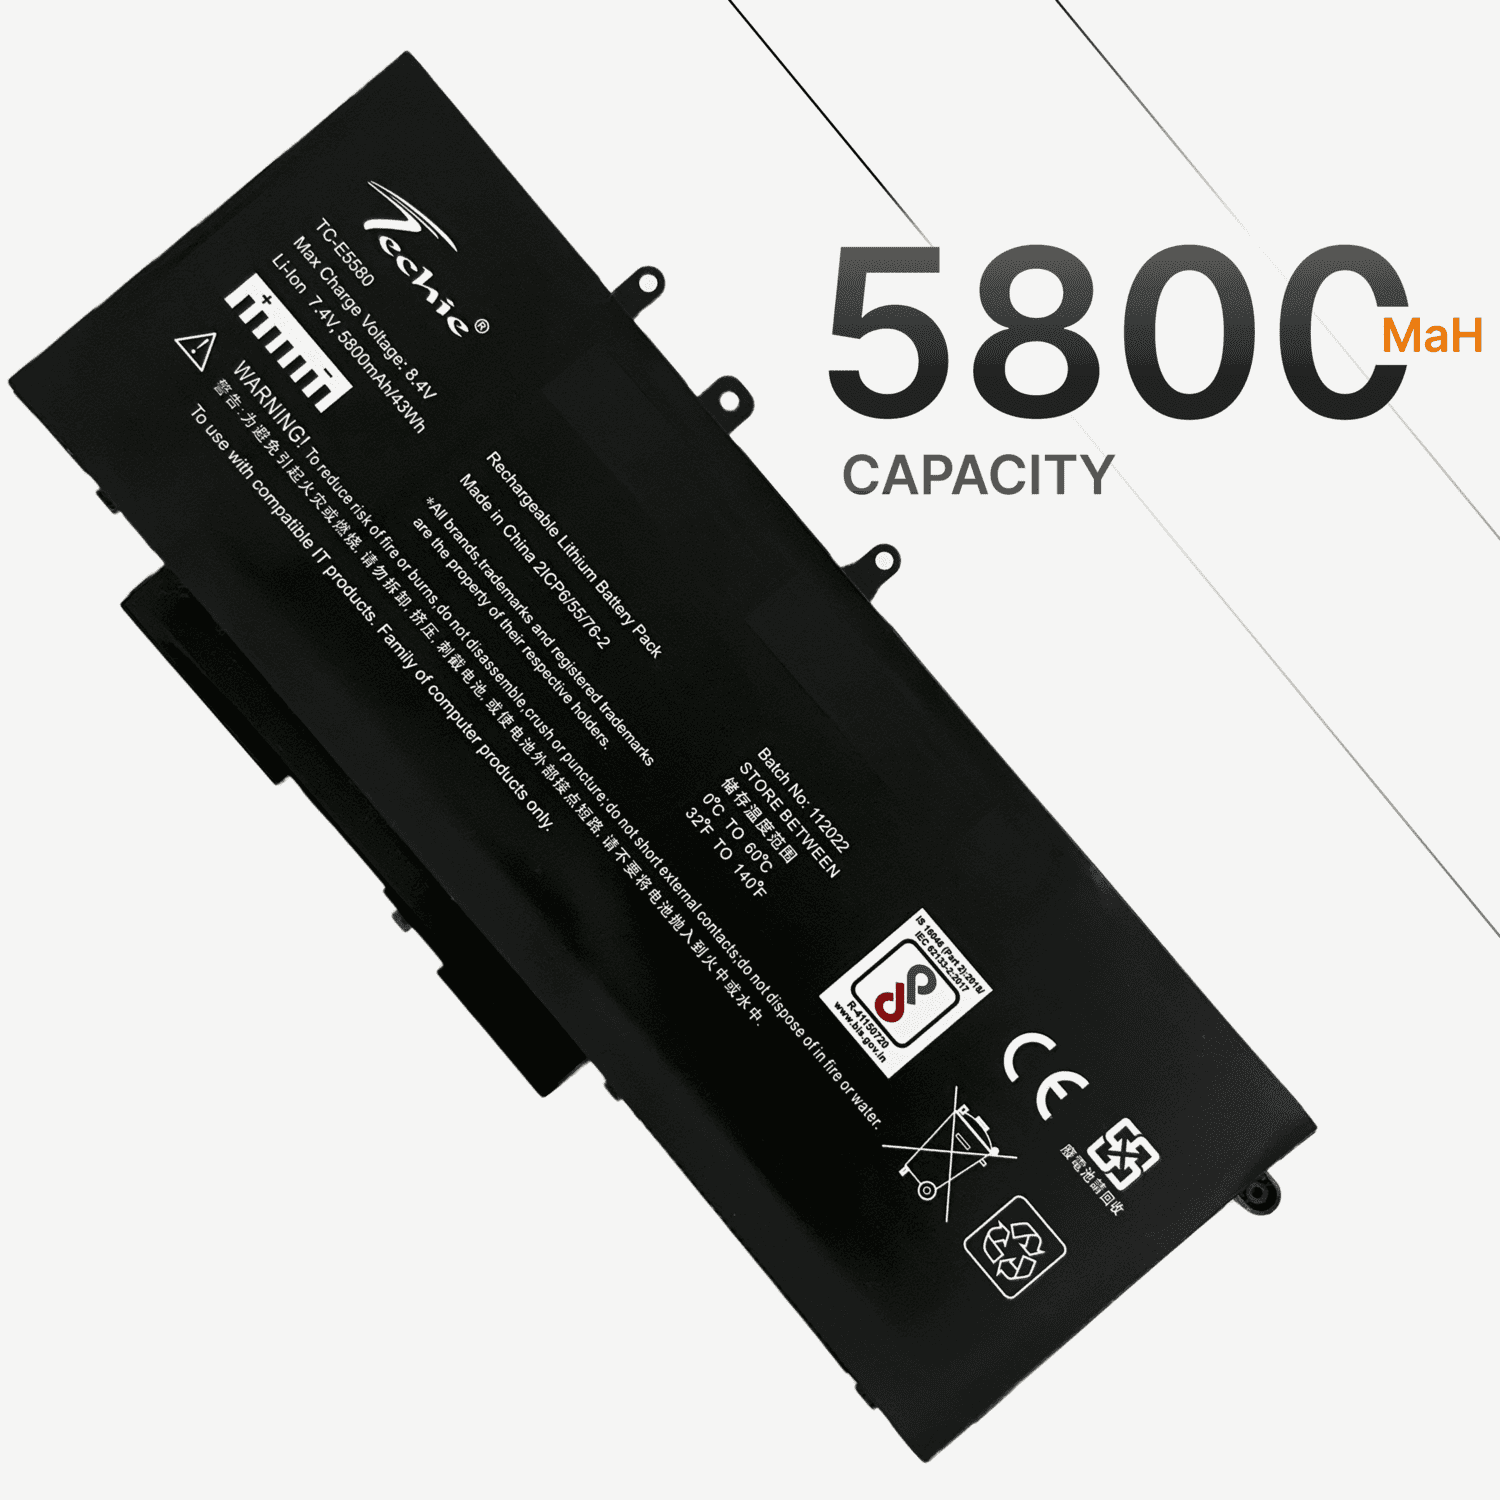 High Quality Dell E5580 Battery For Dell Latitude 5490, 5491, 5580, 5480,  5280, 5290 Laptops.